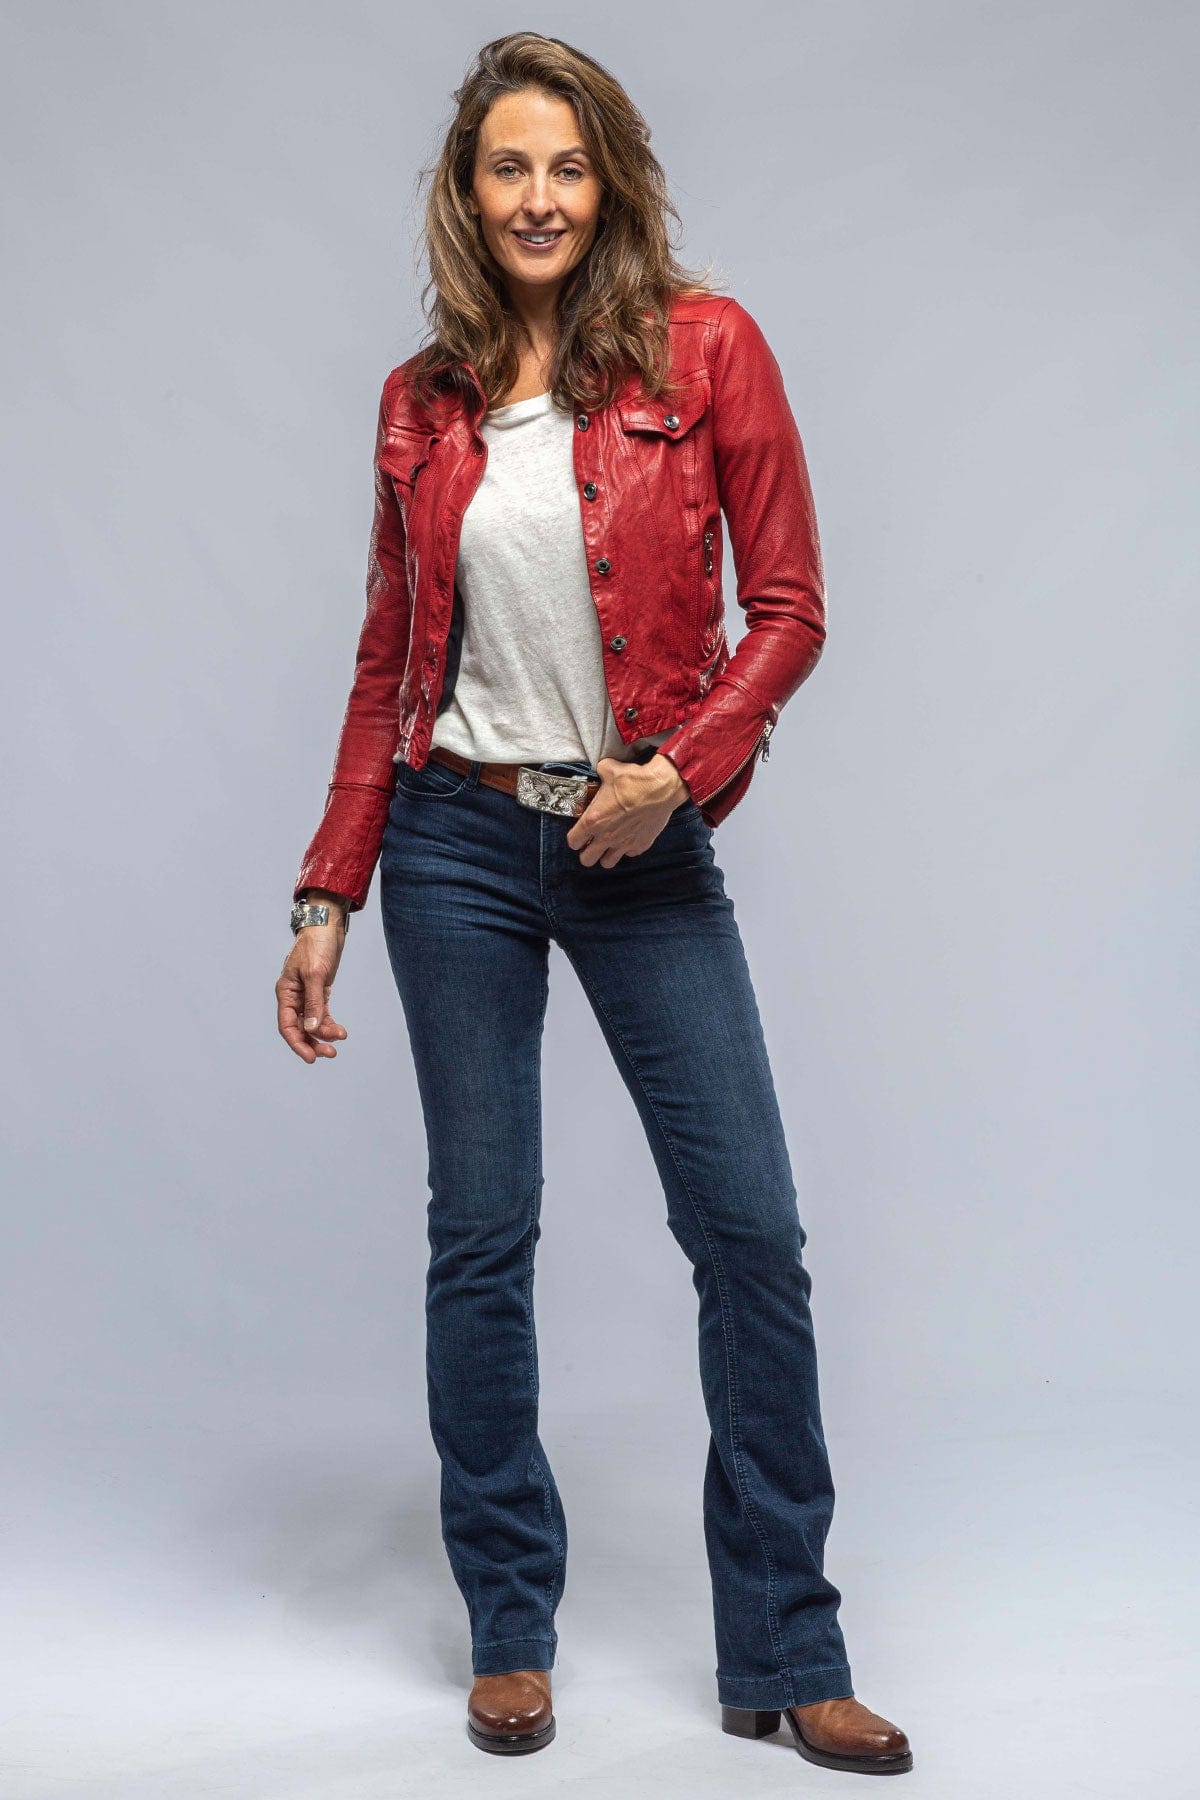 Bristol Leather Jean Jacket in Red - AXEL'S